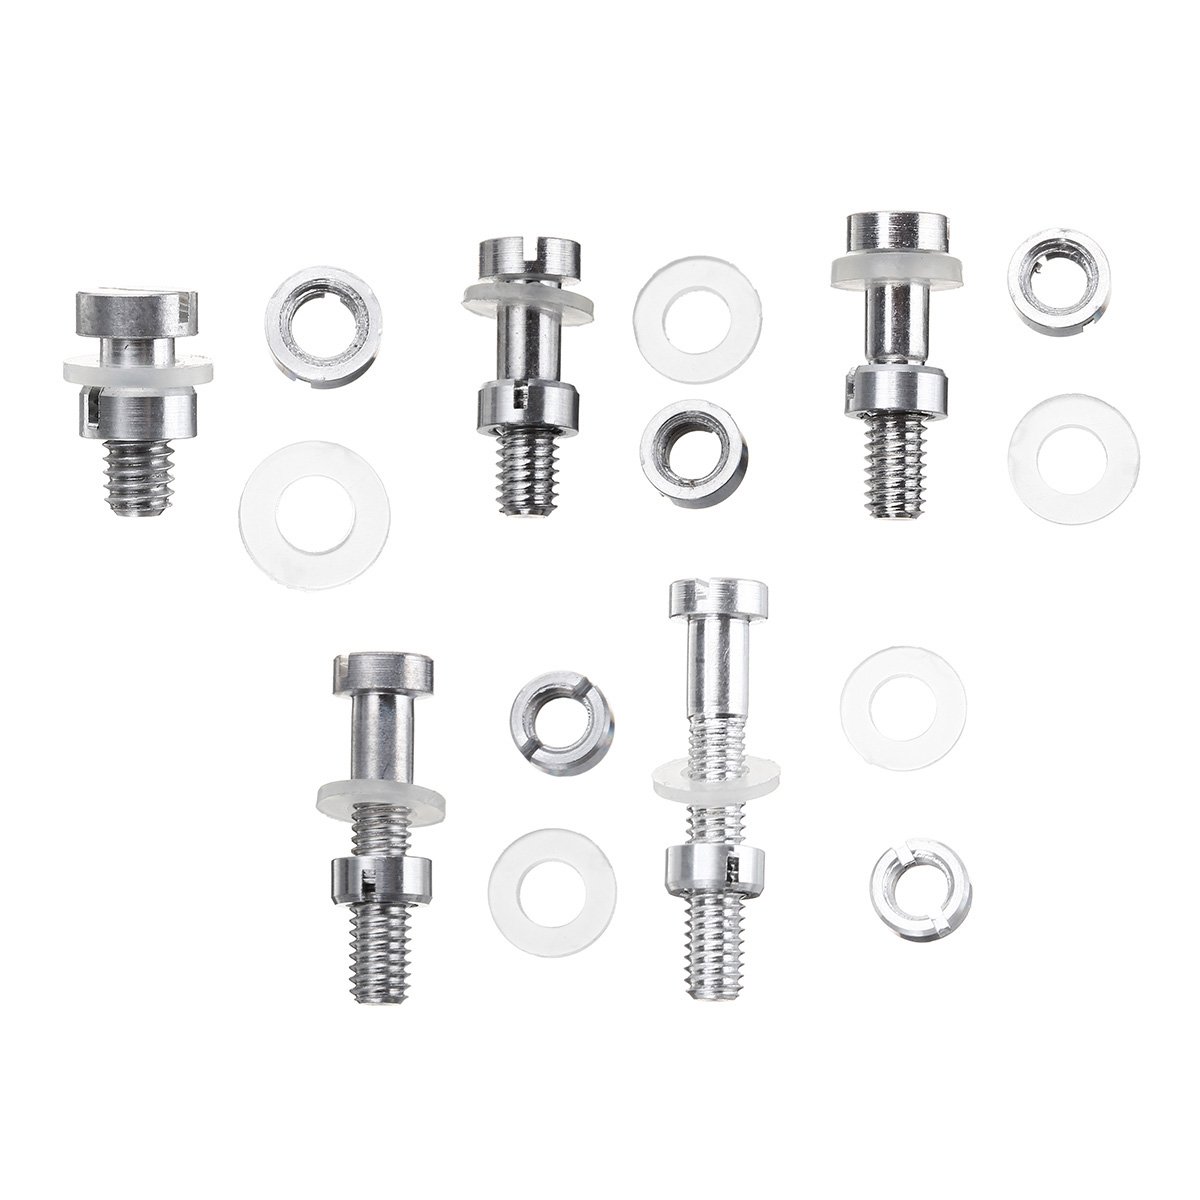 7.5mm/10.5mm/11.5mm/13.5mm/16.5mm M2.5mm Mounting Screw Set For Record Player 1